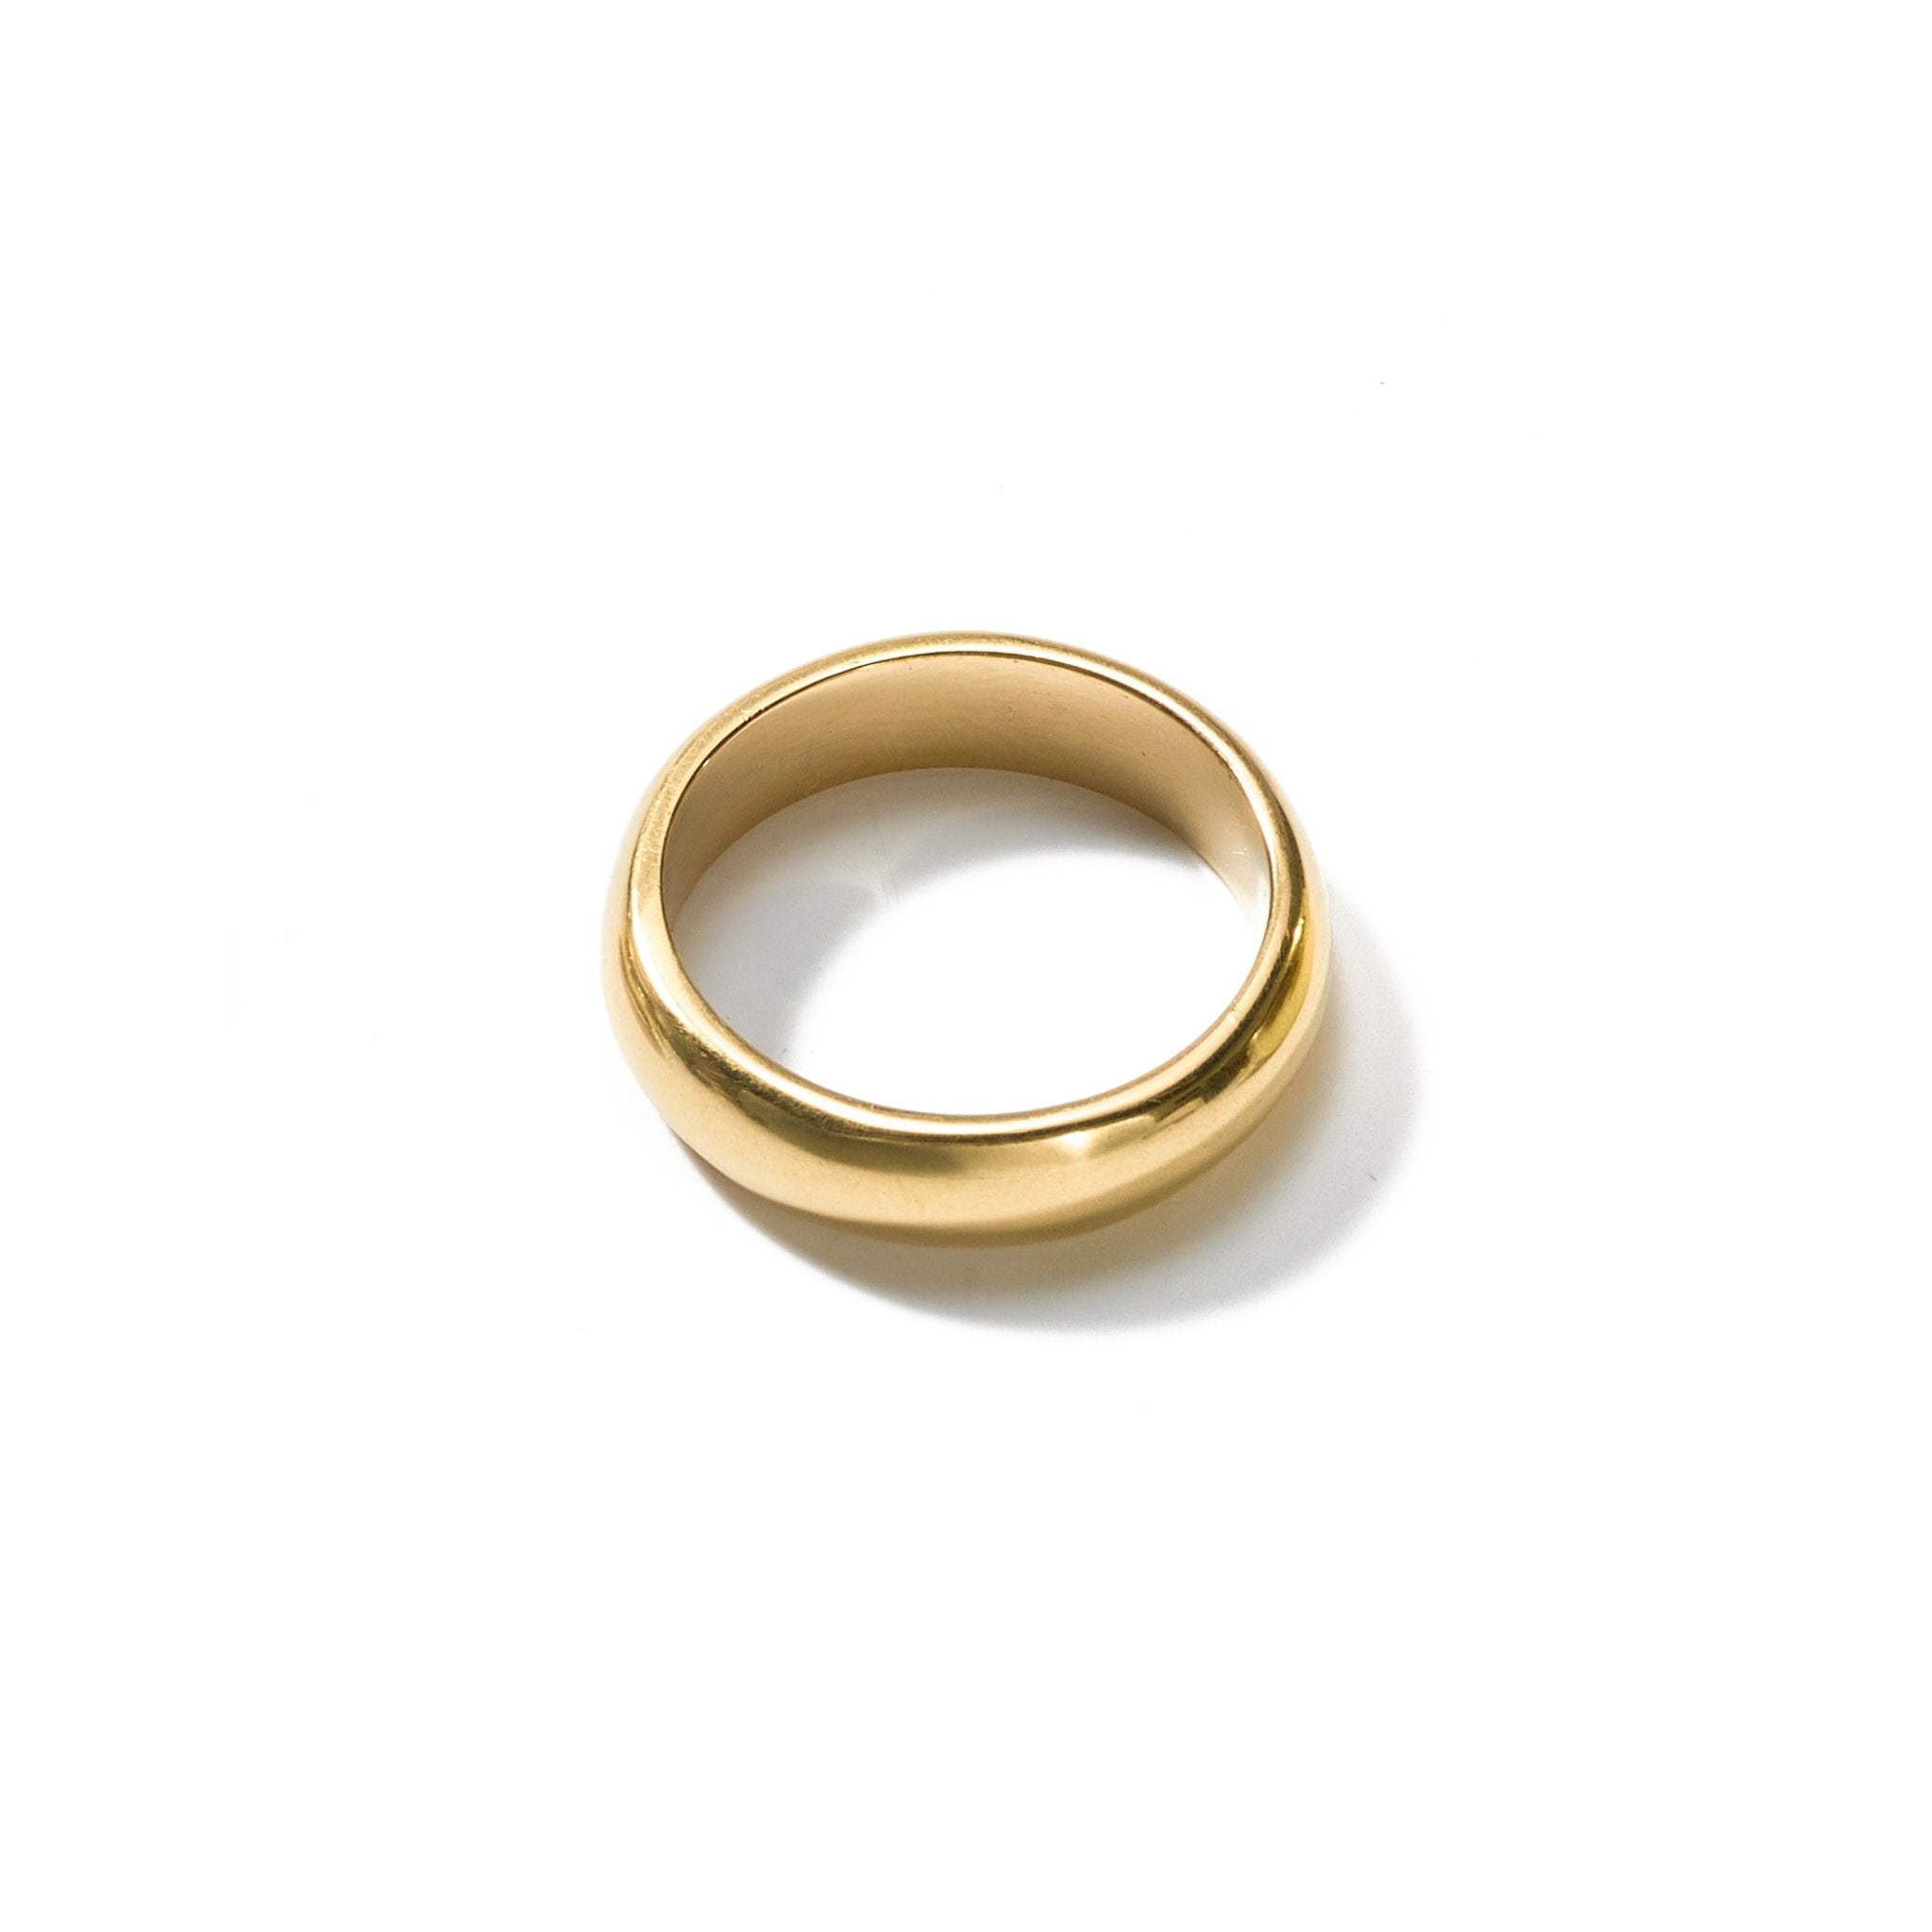 A simple yet elegant size 6.5 ring handcrafted from upcycled brass, featuring a narrow width, and made to be worn every day.